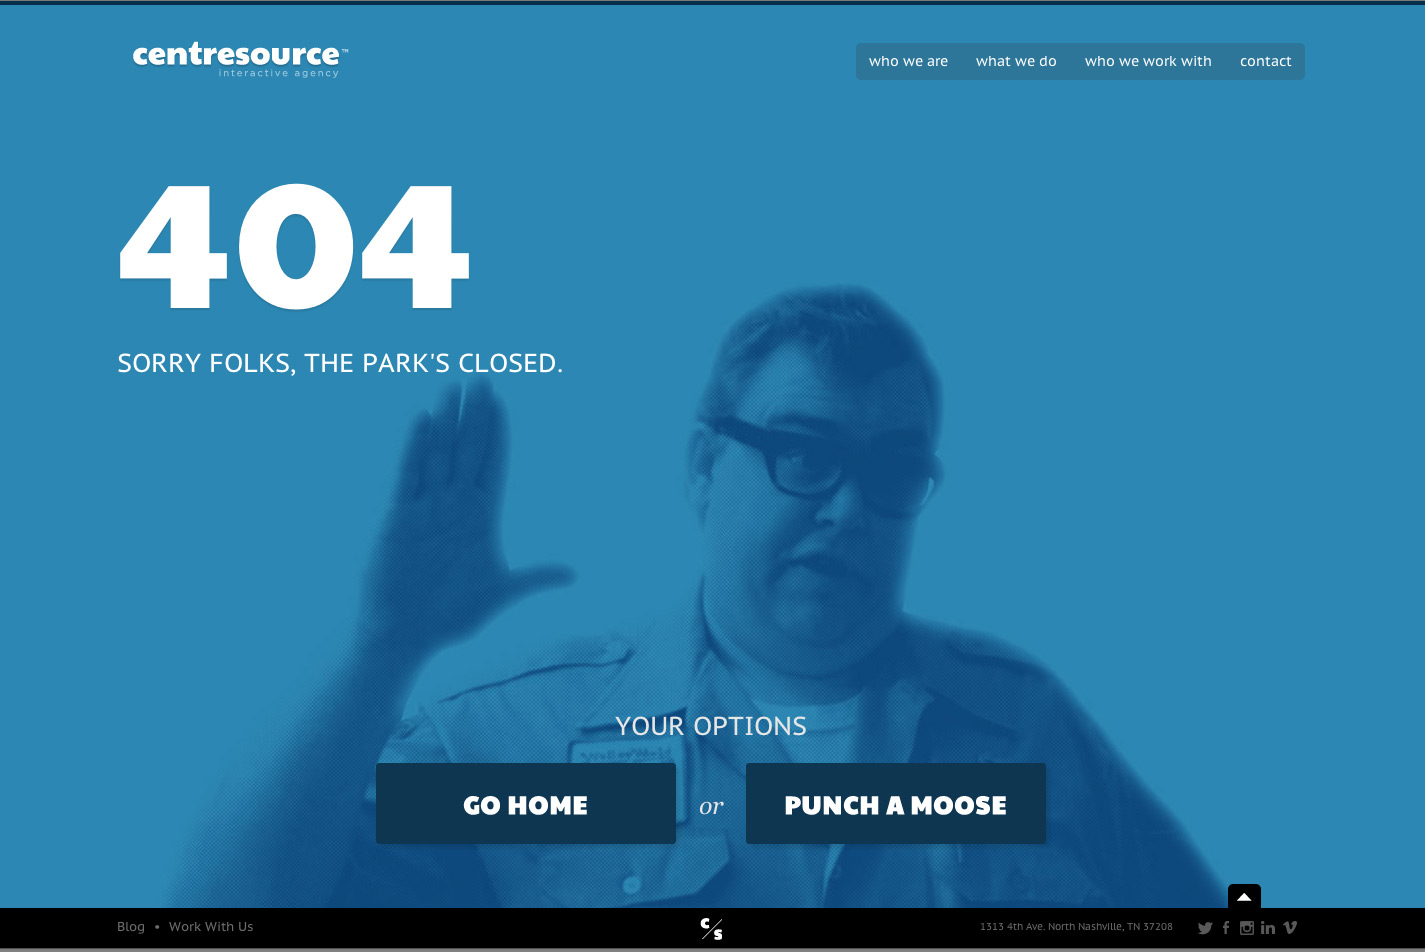 An example 404 error page.